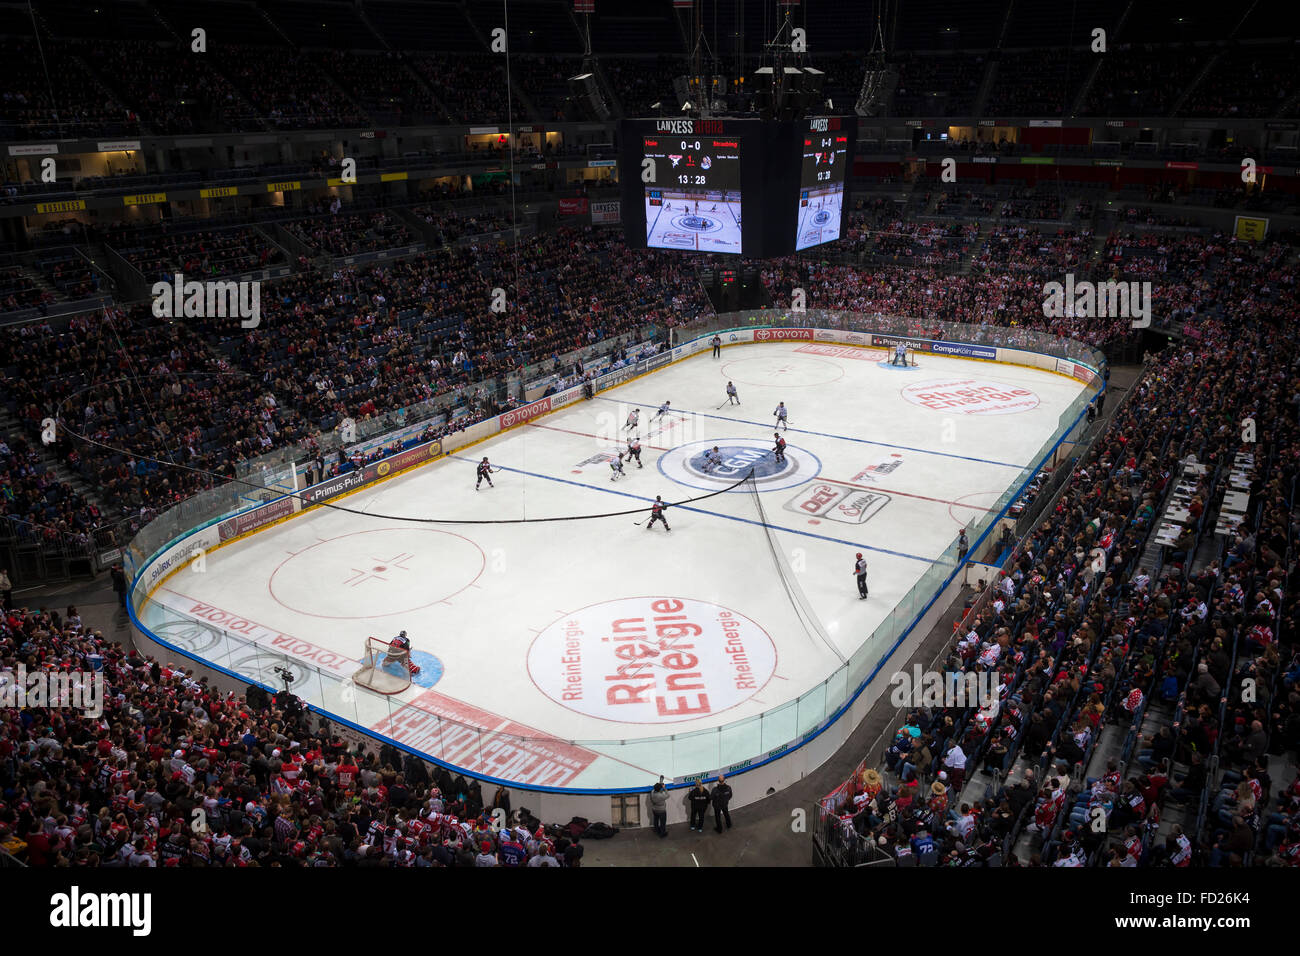 Europe, Germany, Cologne, ice hockey match of the team KEC (Koelner Haie) at the Lanxess Arena (Cologne Arena) in the town distr Stock Photo